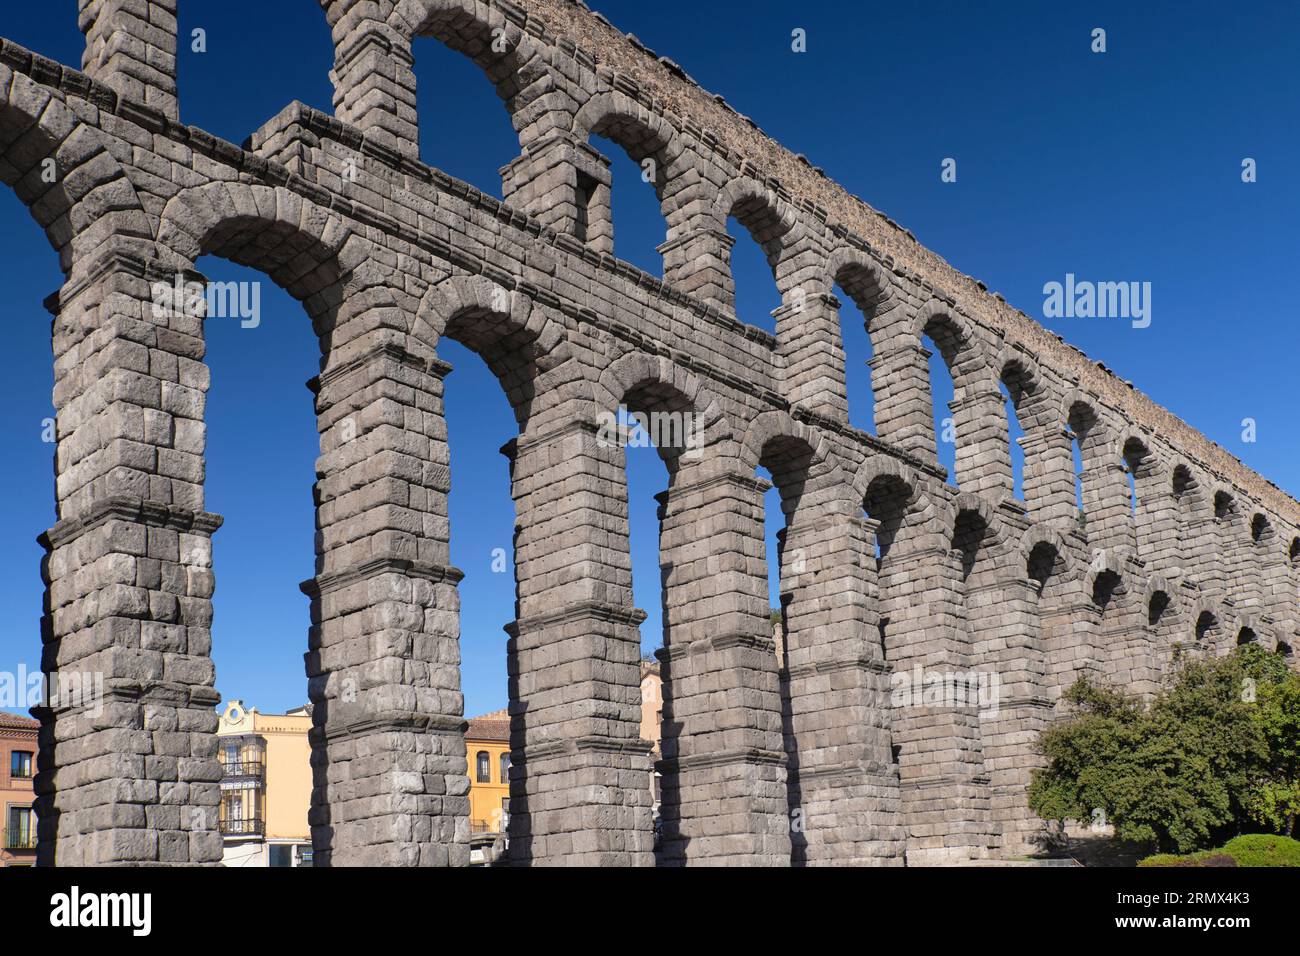 Spain, Castile and Leon, Segovia, Aqueduct of Segovia, a Roman aqueduct with 167 arches built around the first century AD to channel water from spring Stock Photo